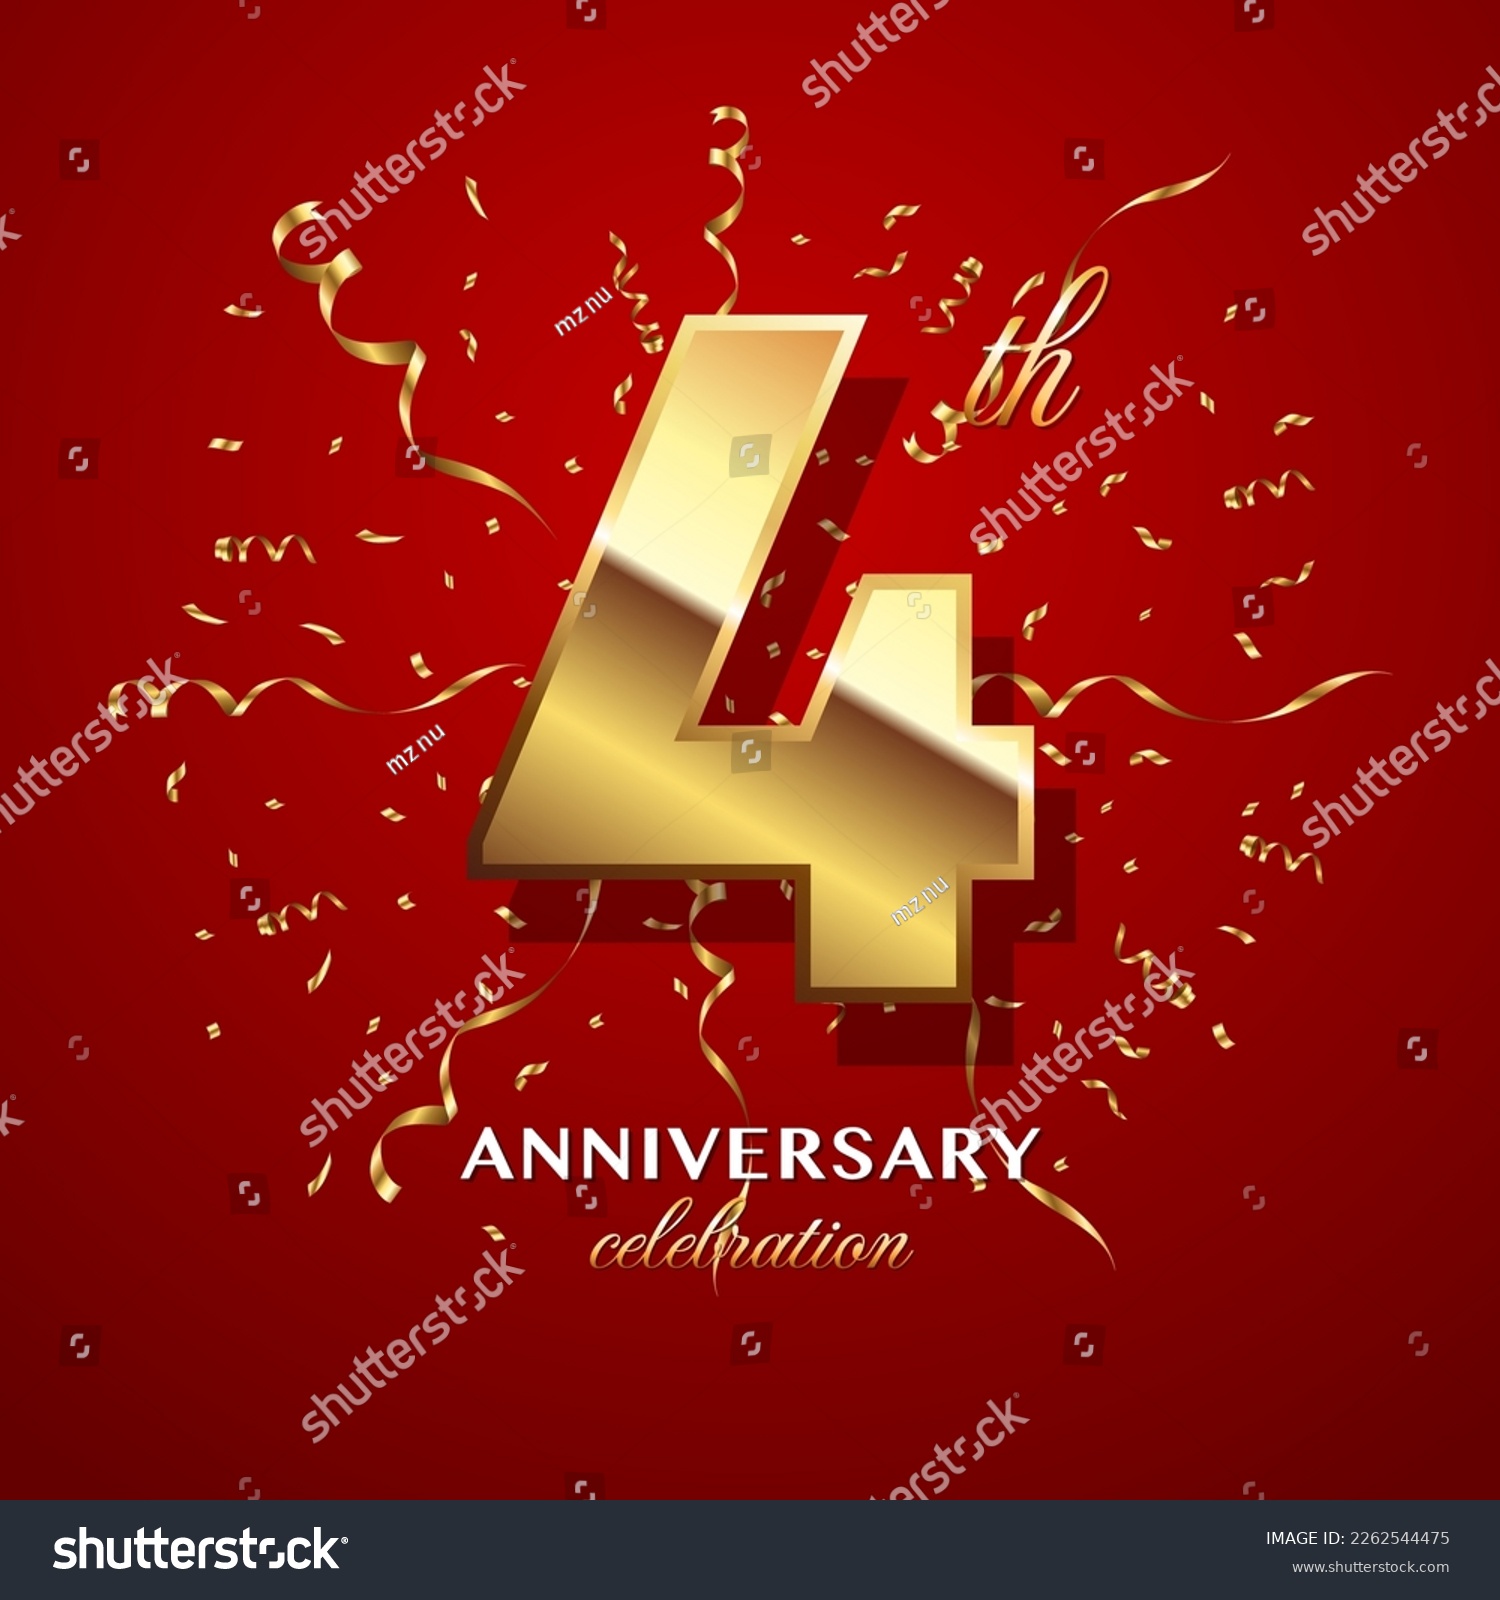 SVG of 4th Anniversary Celebration. logo design with golden numbers and text for birthday celebration event, invitation, wedding, greeting card, banner, poster, flyer, brochure. Logo Vector Template svg